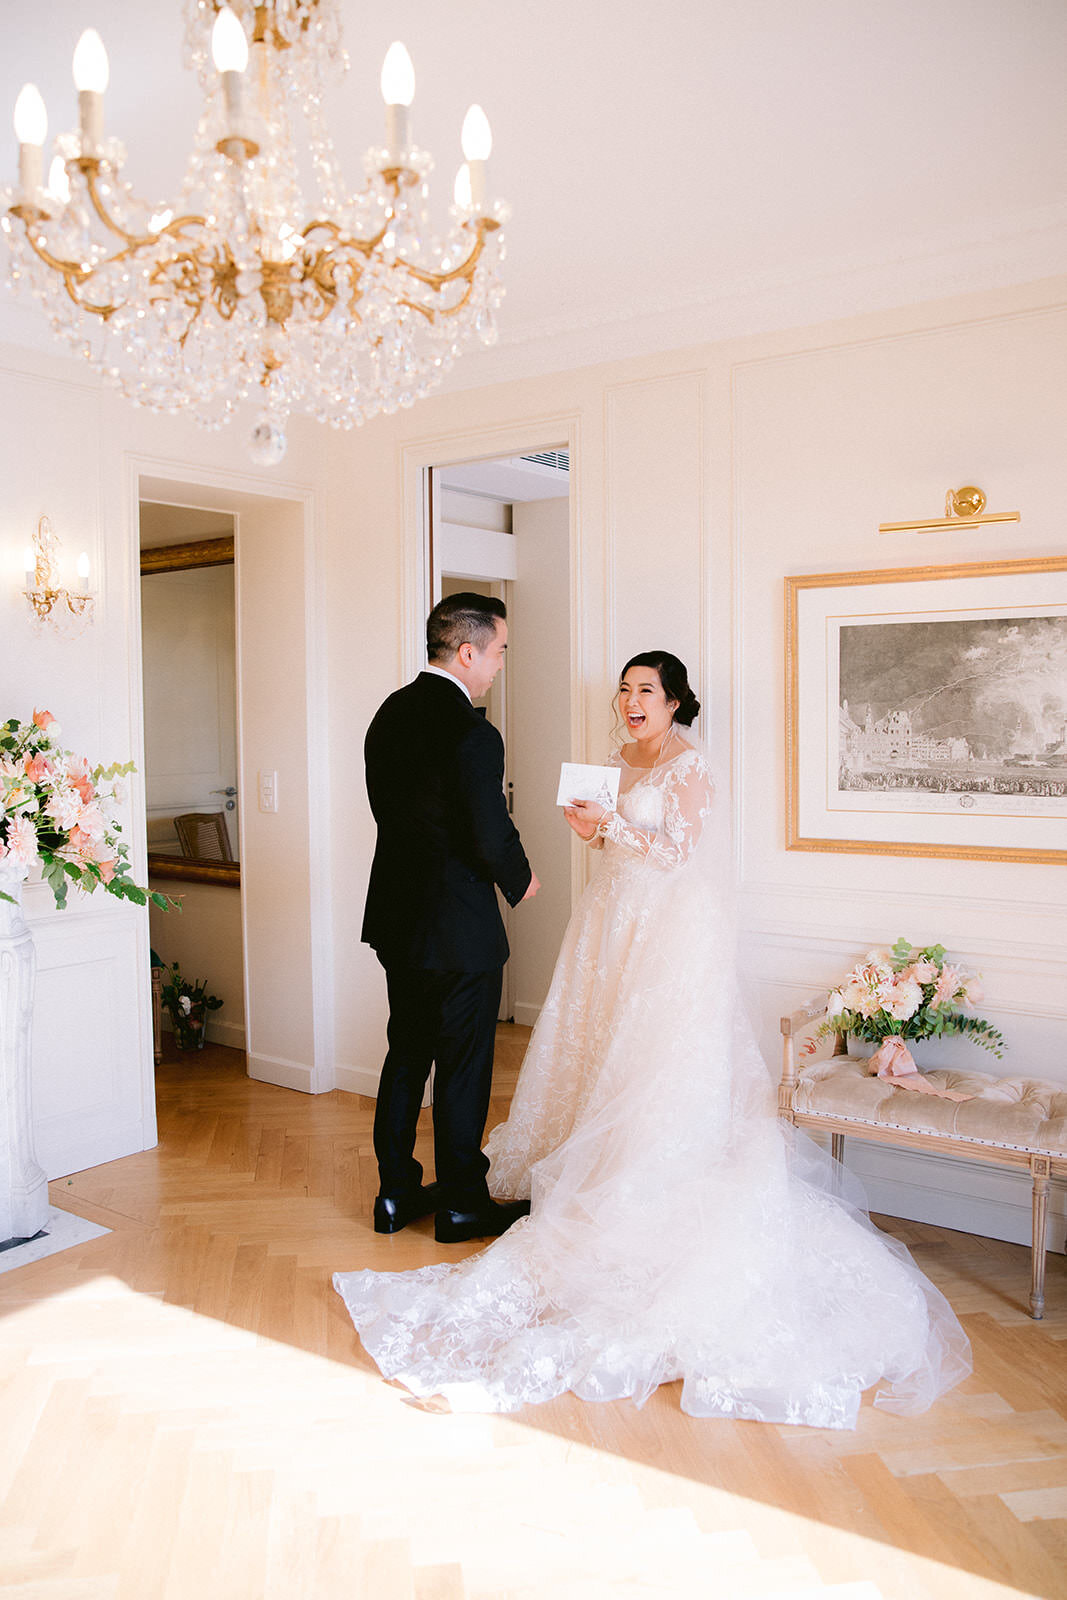 Brides and Groom's first look photoshoot for their destination Paris wedding